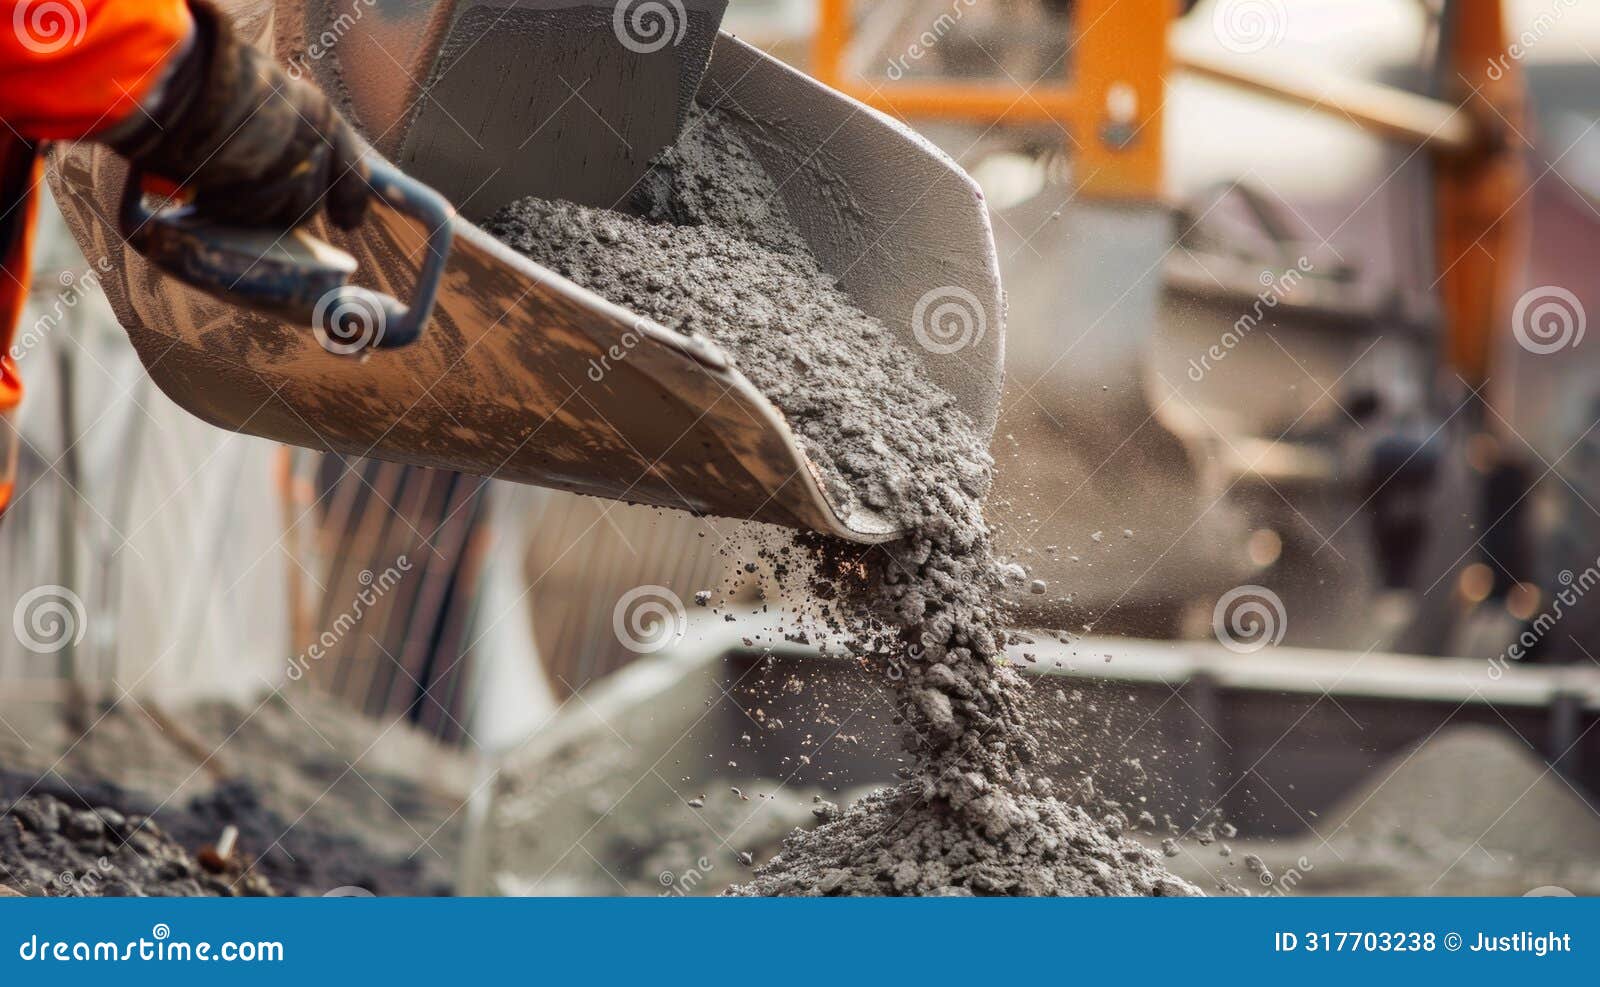 a worker uses a large mixing machine to combine aggregates cement and water for the perfect concrete mix